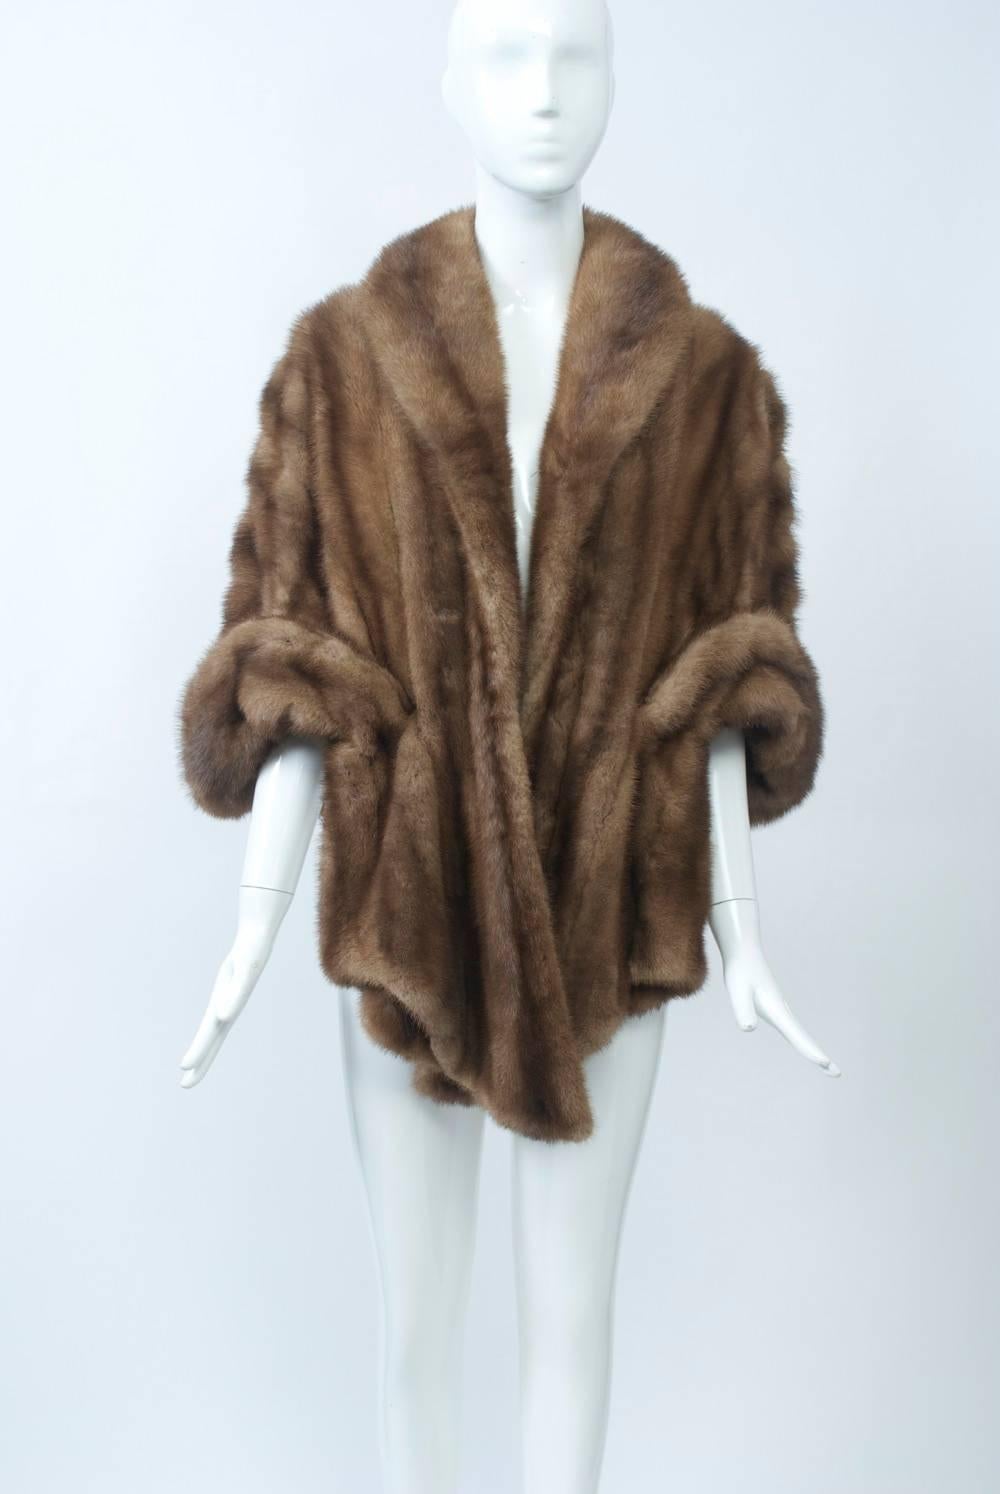 Vintage mink stole in light brown reaches below waist in back, which is seven skins deep. The front features a shawl collar and turned-back cuffs, which make the stole appear like a jacket. Full brocade lining in good condition. A very nice and